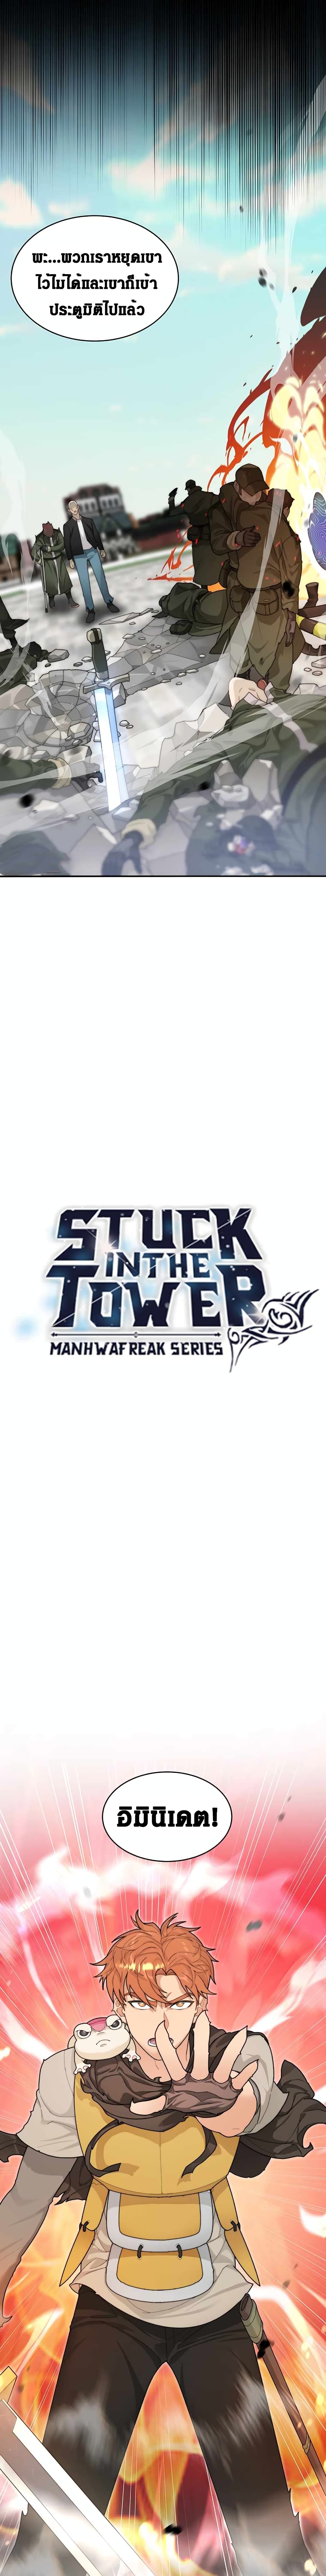 Stuck in the Tower 9-9